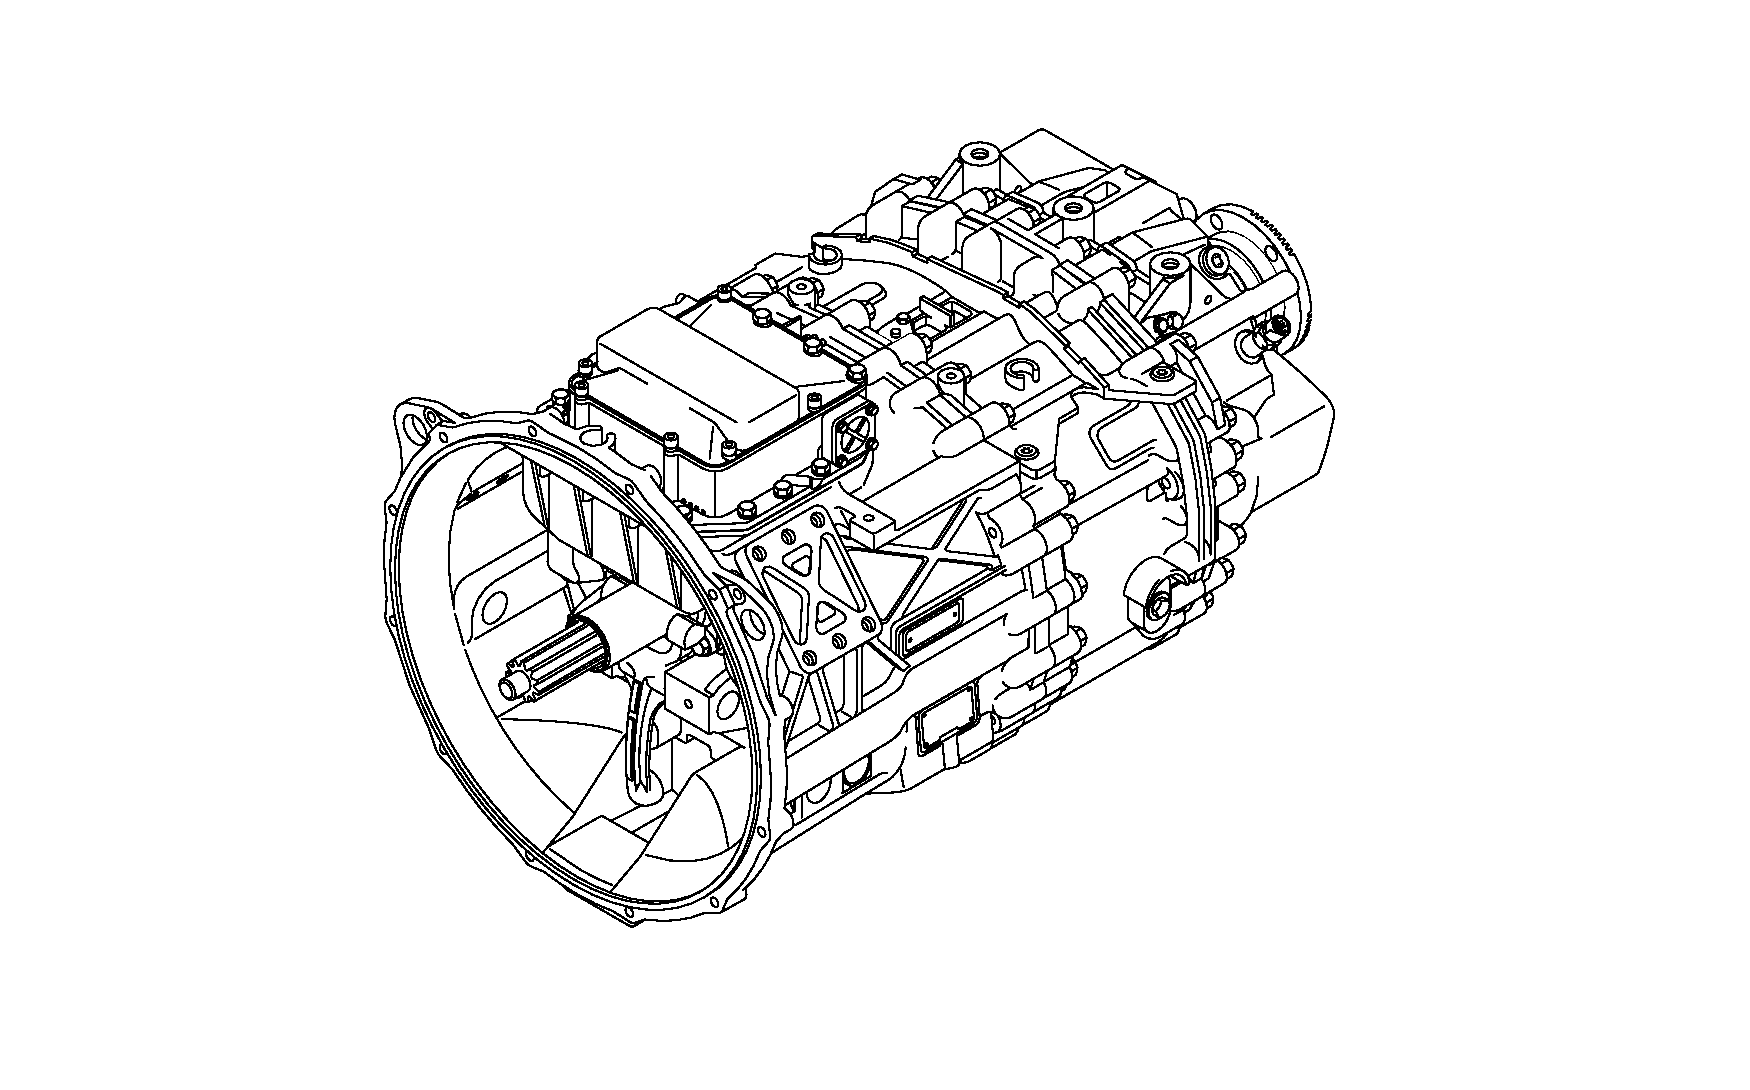 drawing for ISUZU MOTORS LIMITED 1-33043-367-0 - 16 AS 2200 (figure 1)